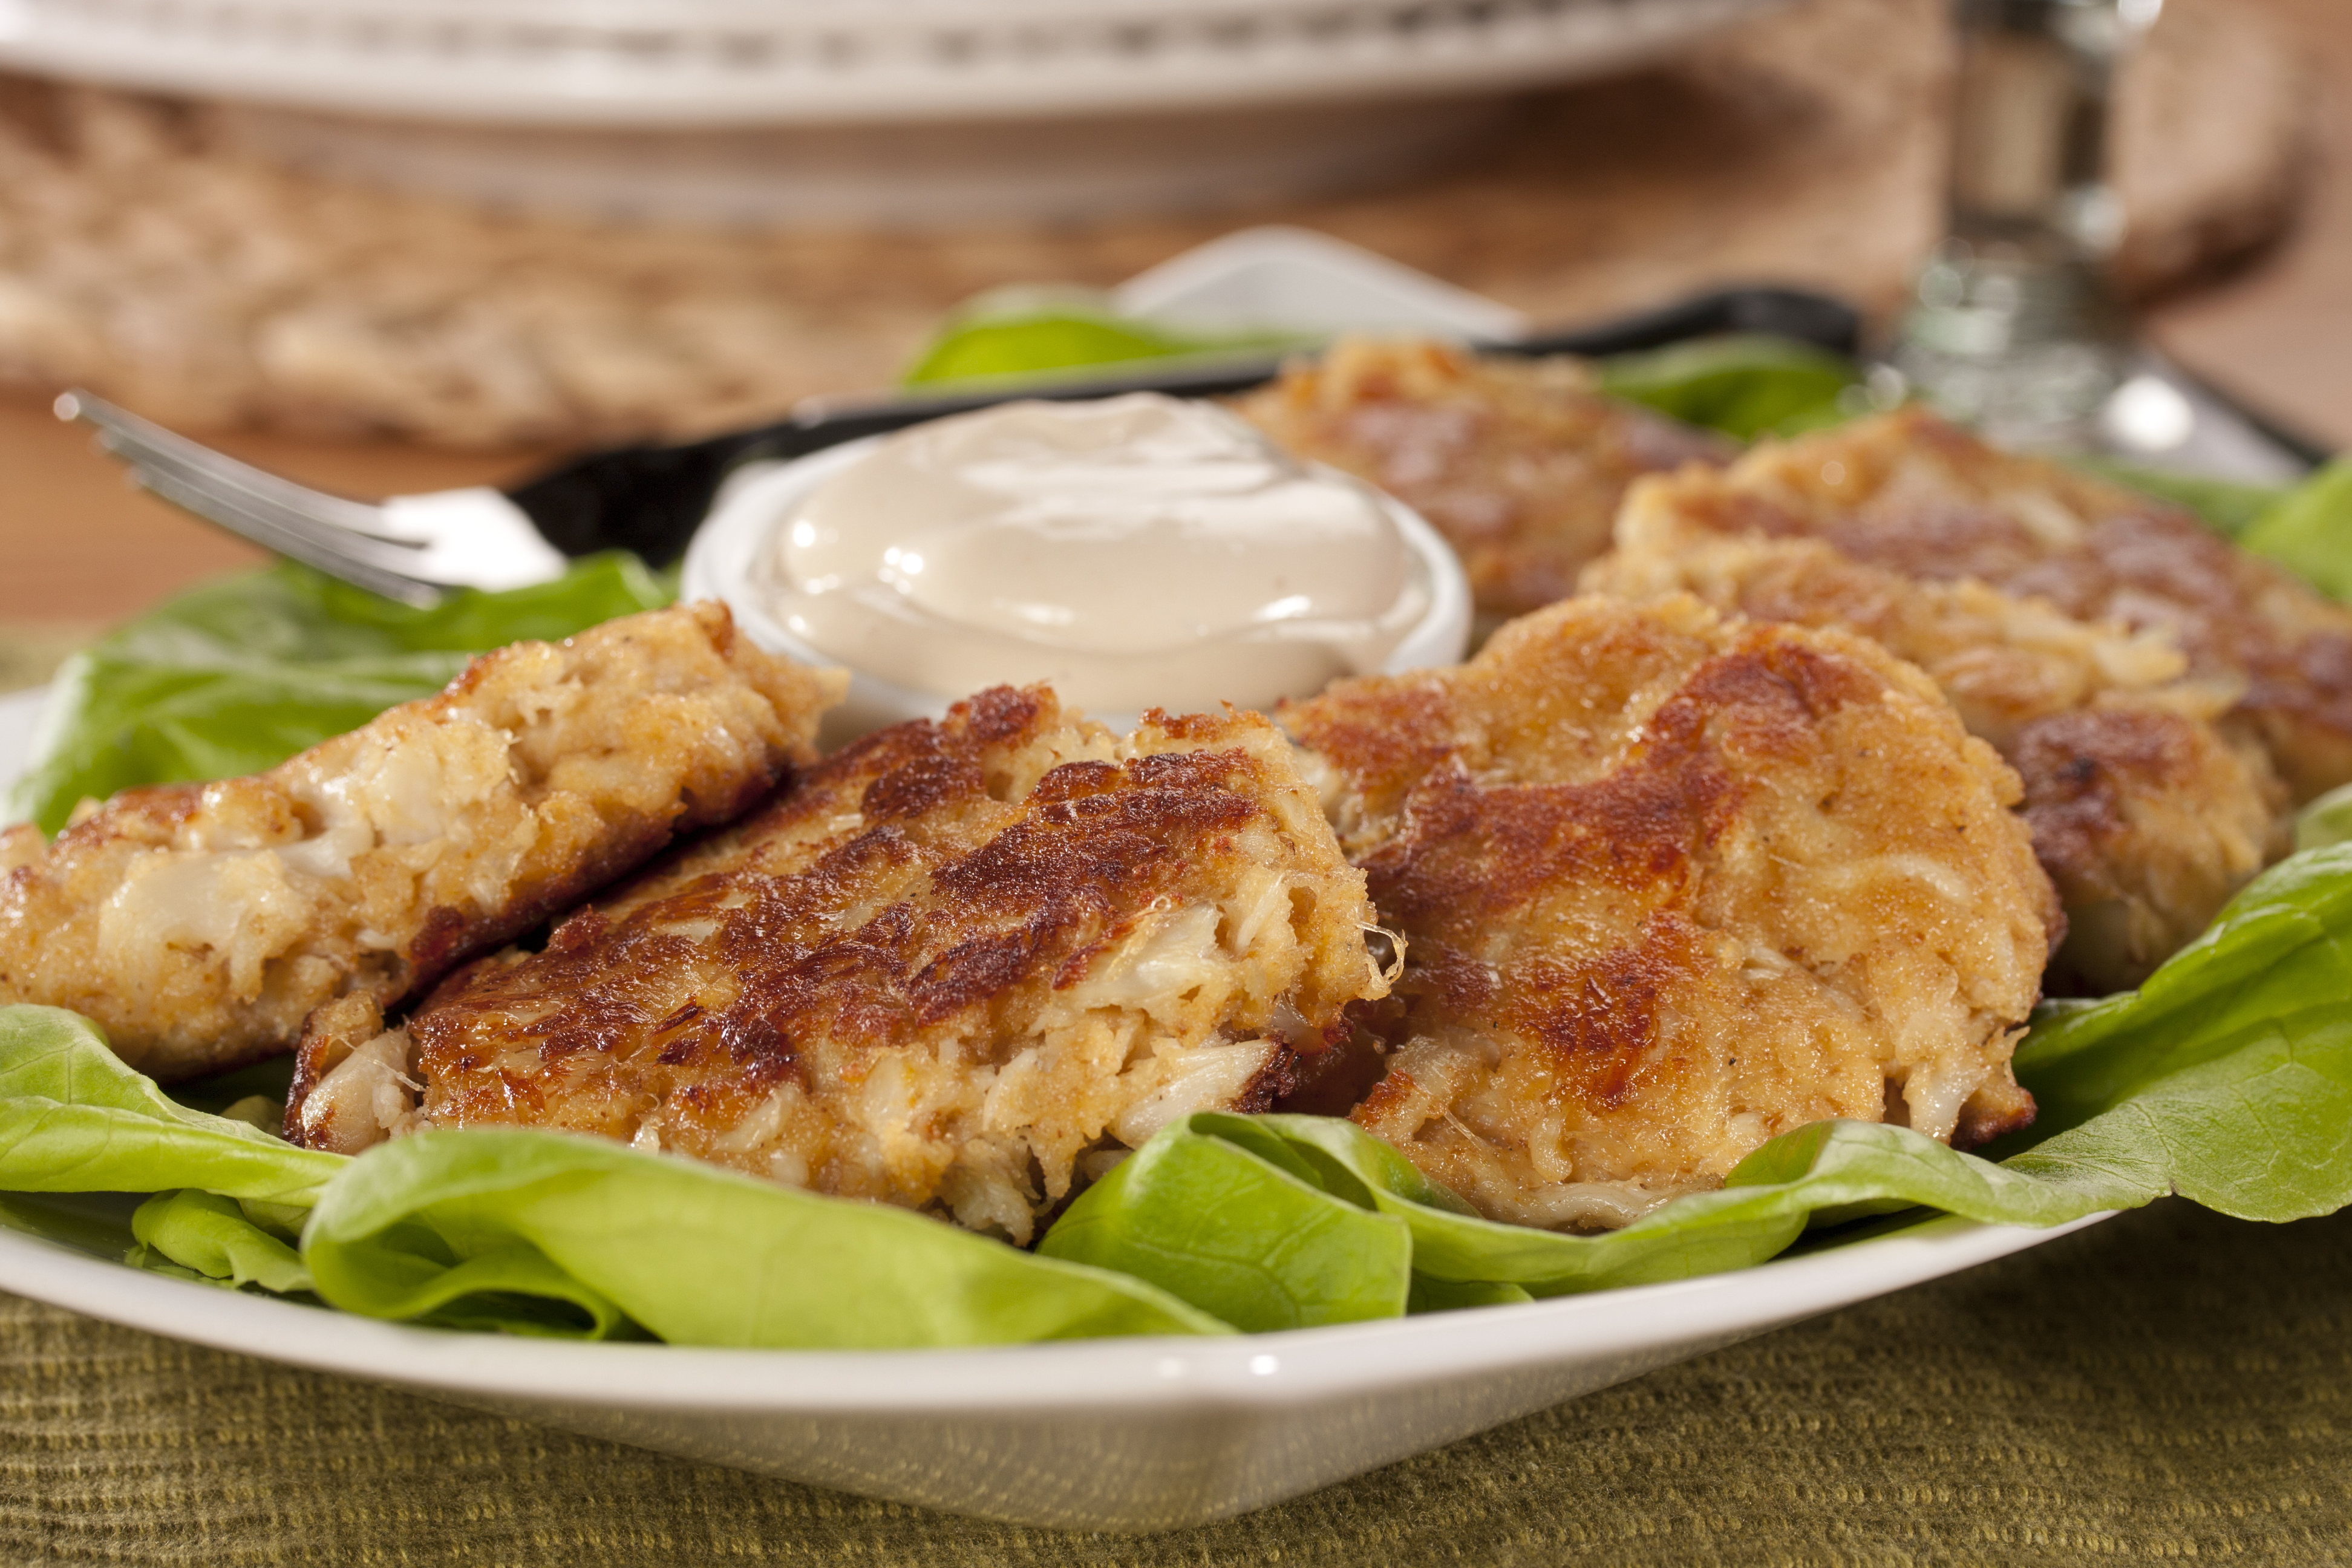 Crab Cakes - Delicious and Cost-friendly Crab Cakes Made at Home!